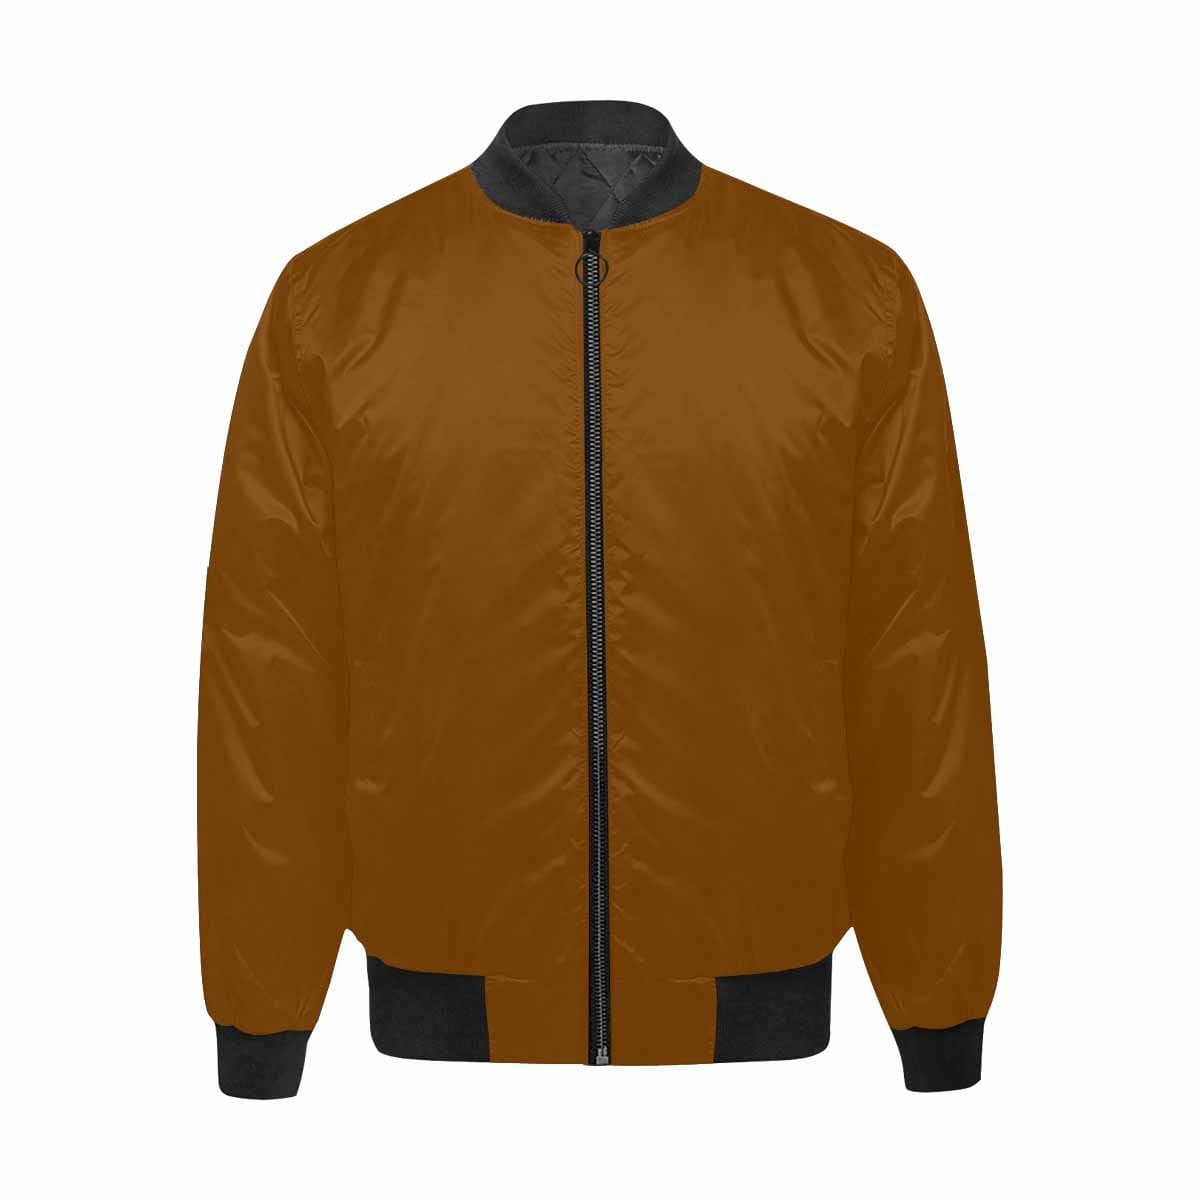 Bomber Jacket For Men Chocolate Brown And Black - Mens | Jackets | Bombers